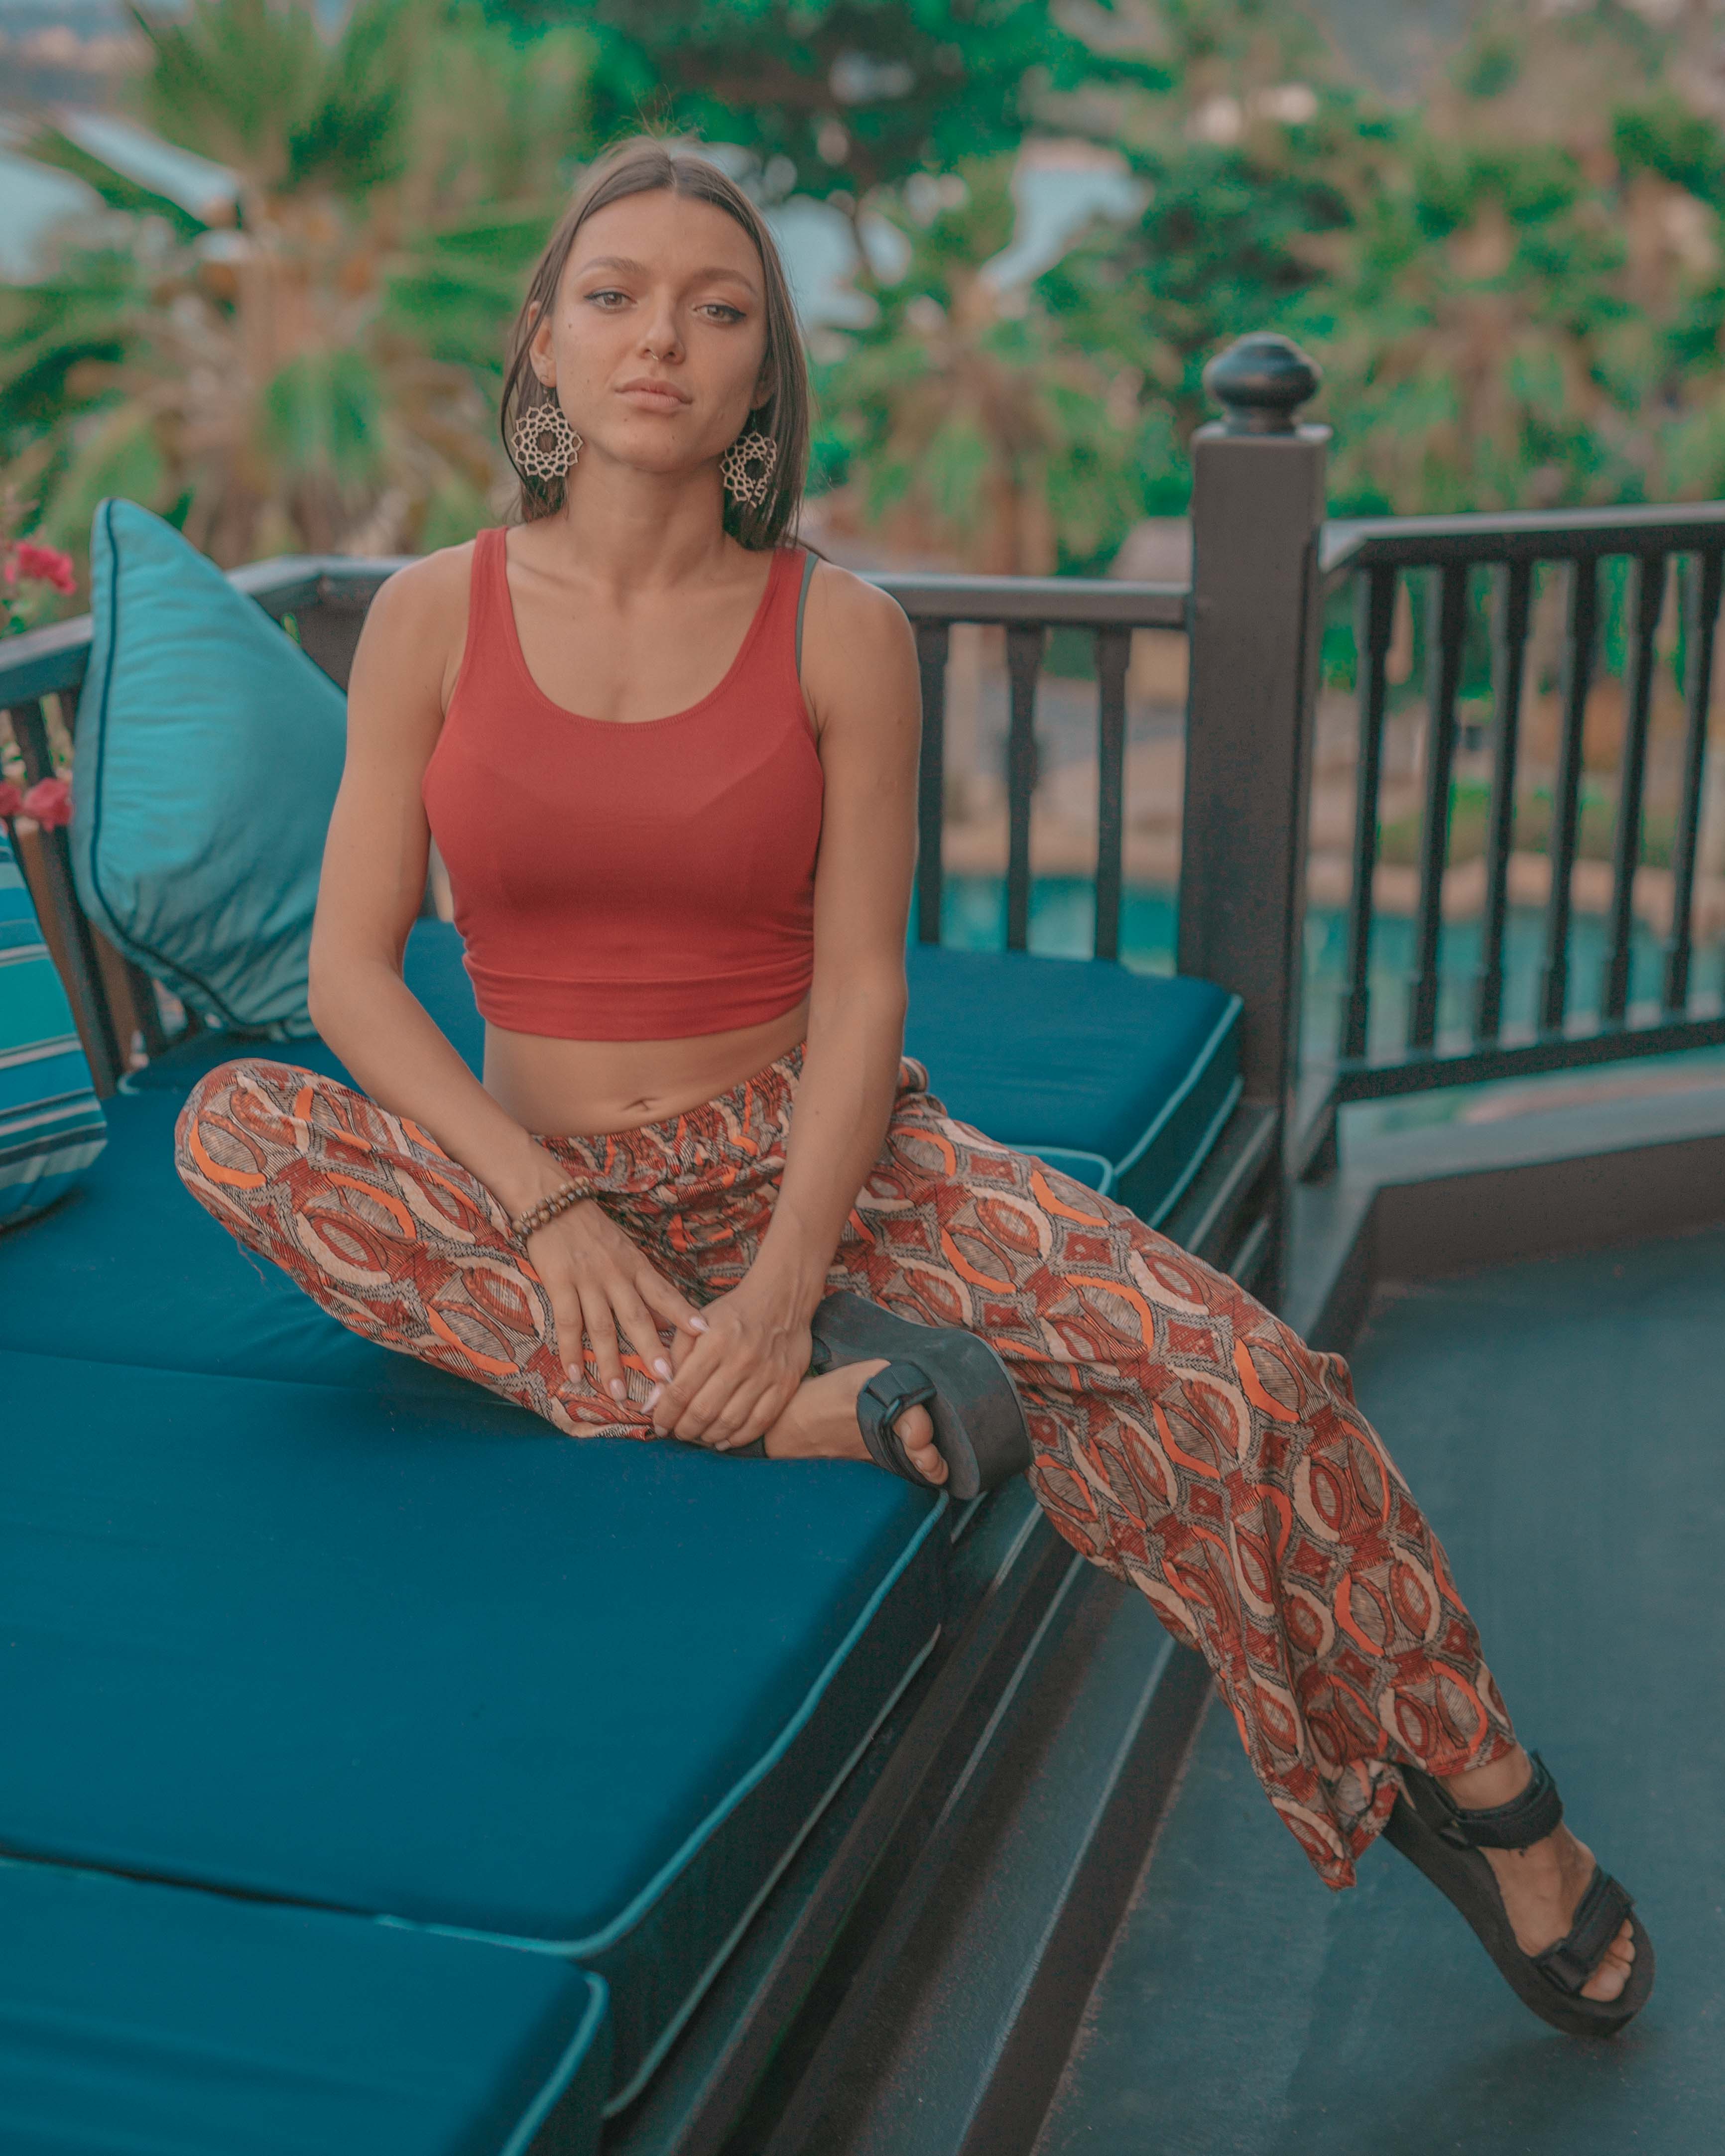 Casual Pants - Buy Today Elephant Pants Jewelry And Bohemian Clothes Handmade In Thailand Help To Save The Elephants FairTrade And Vegan